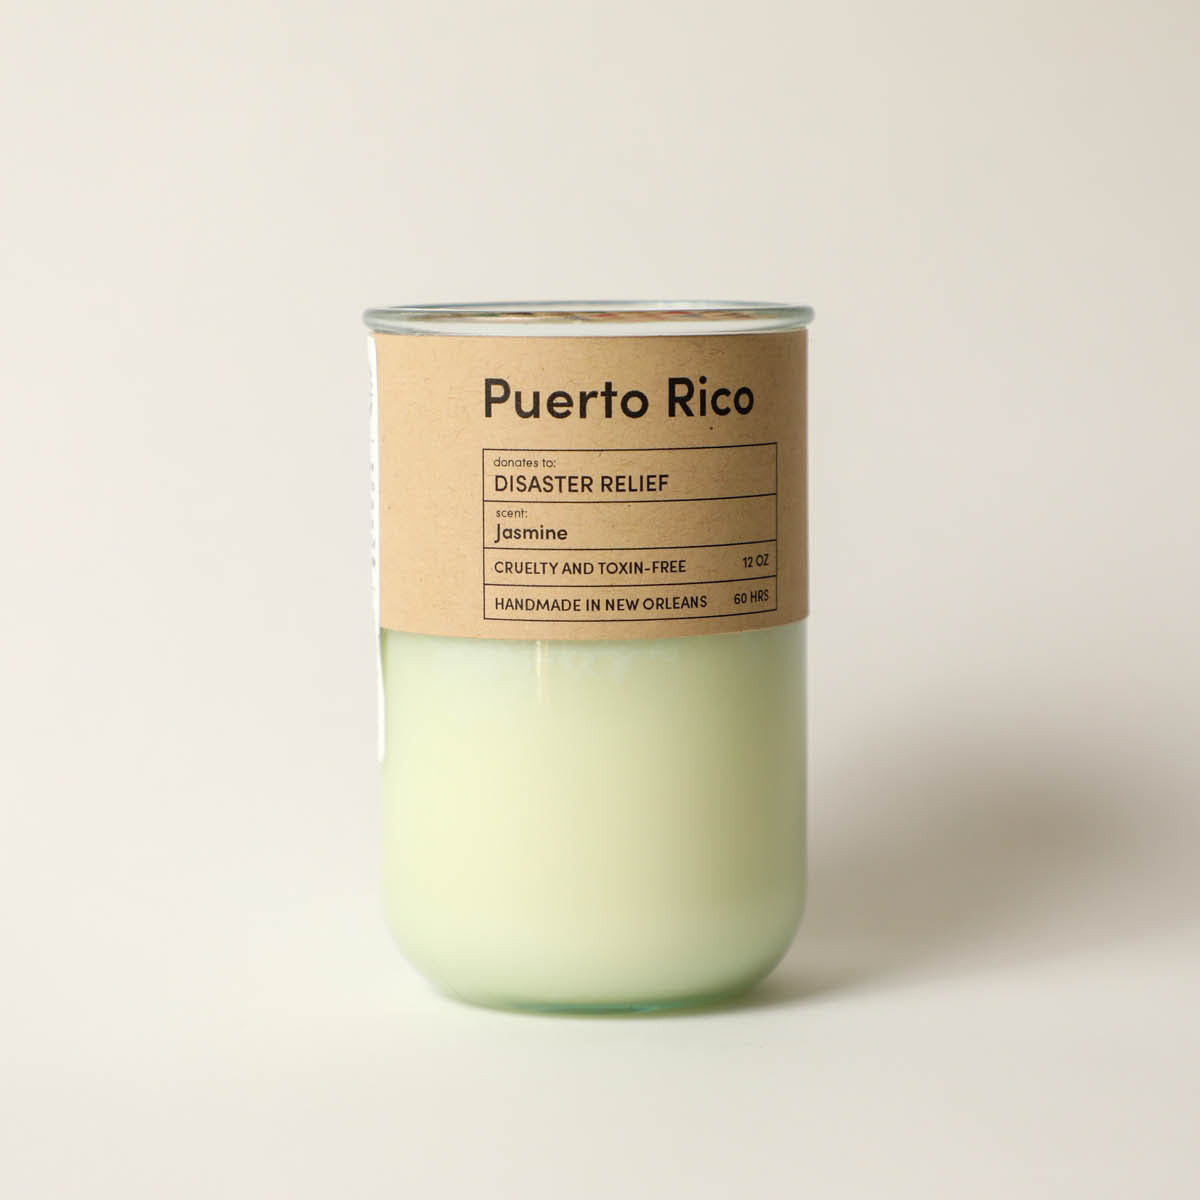 Rebuild, Puerto Rico Disaster Relief / Jasmine Scent: Candles for Good